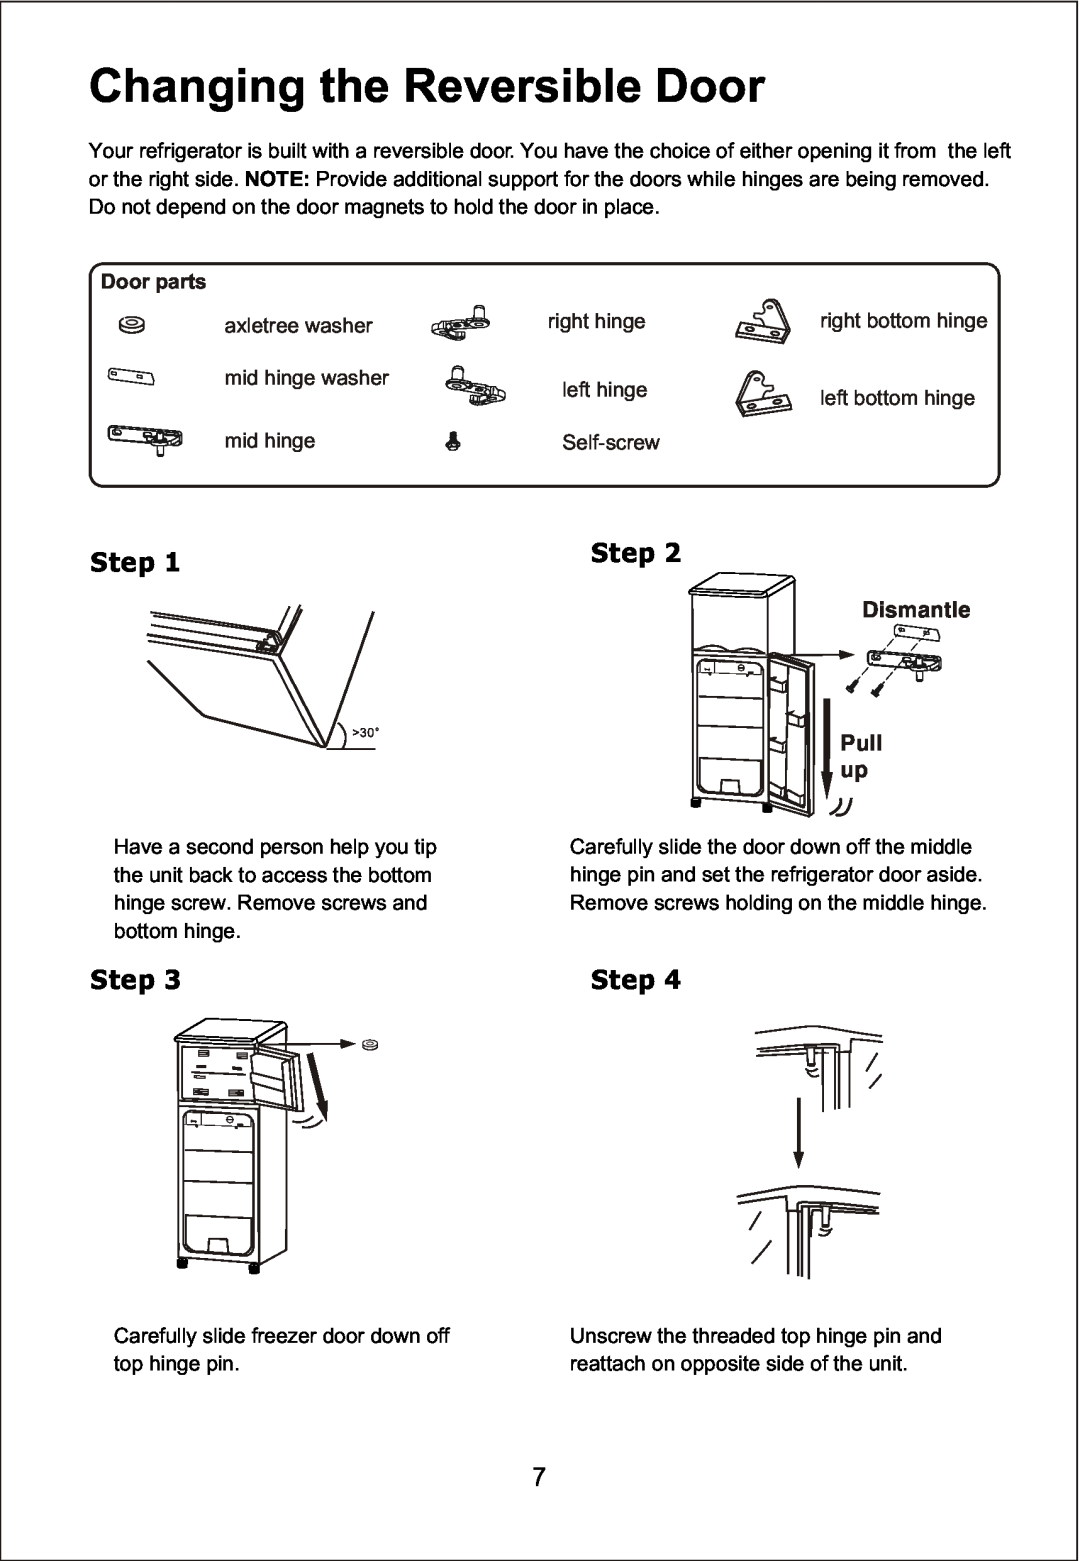 Magic Chef MCBR510W important safety instructions Changing the Reversible Door, Step, Door parts, Dismantle, Pull up 